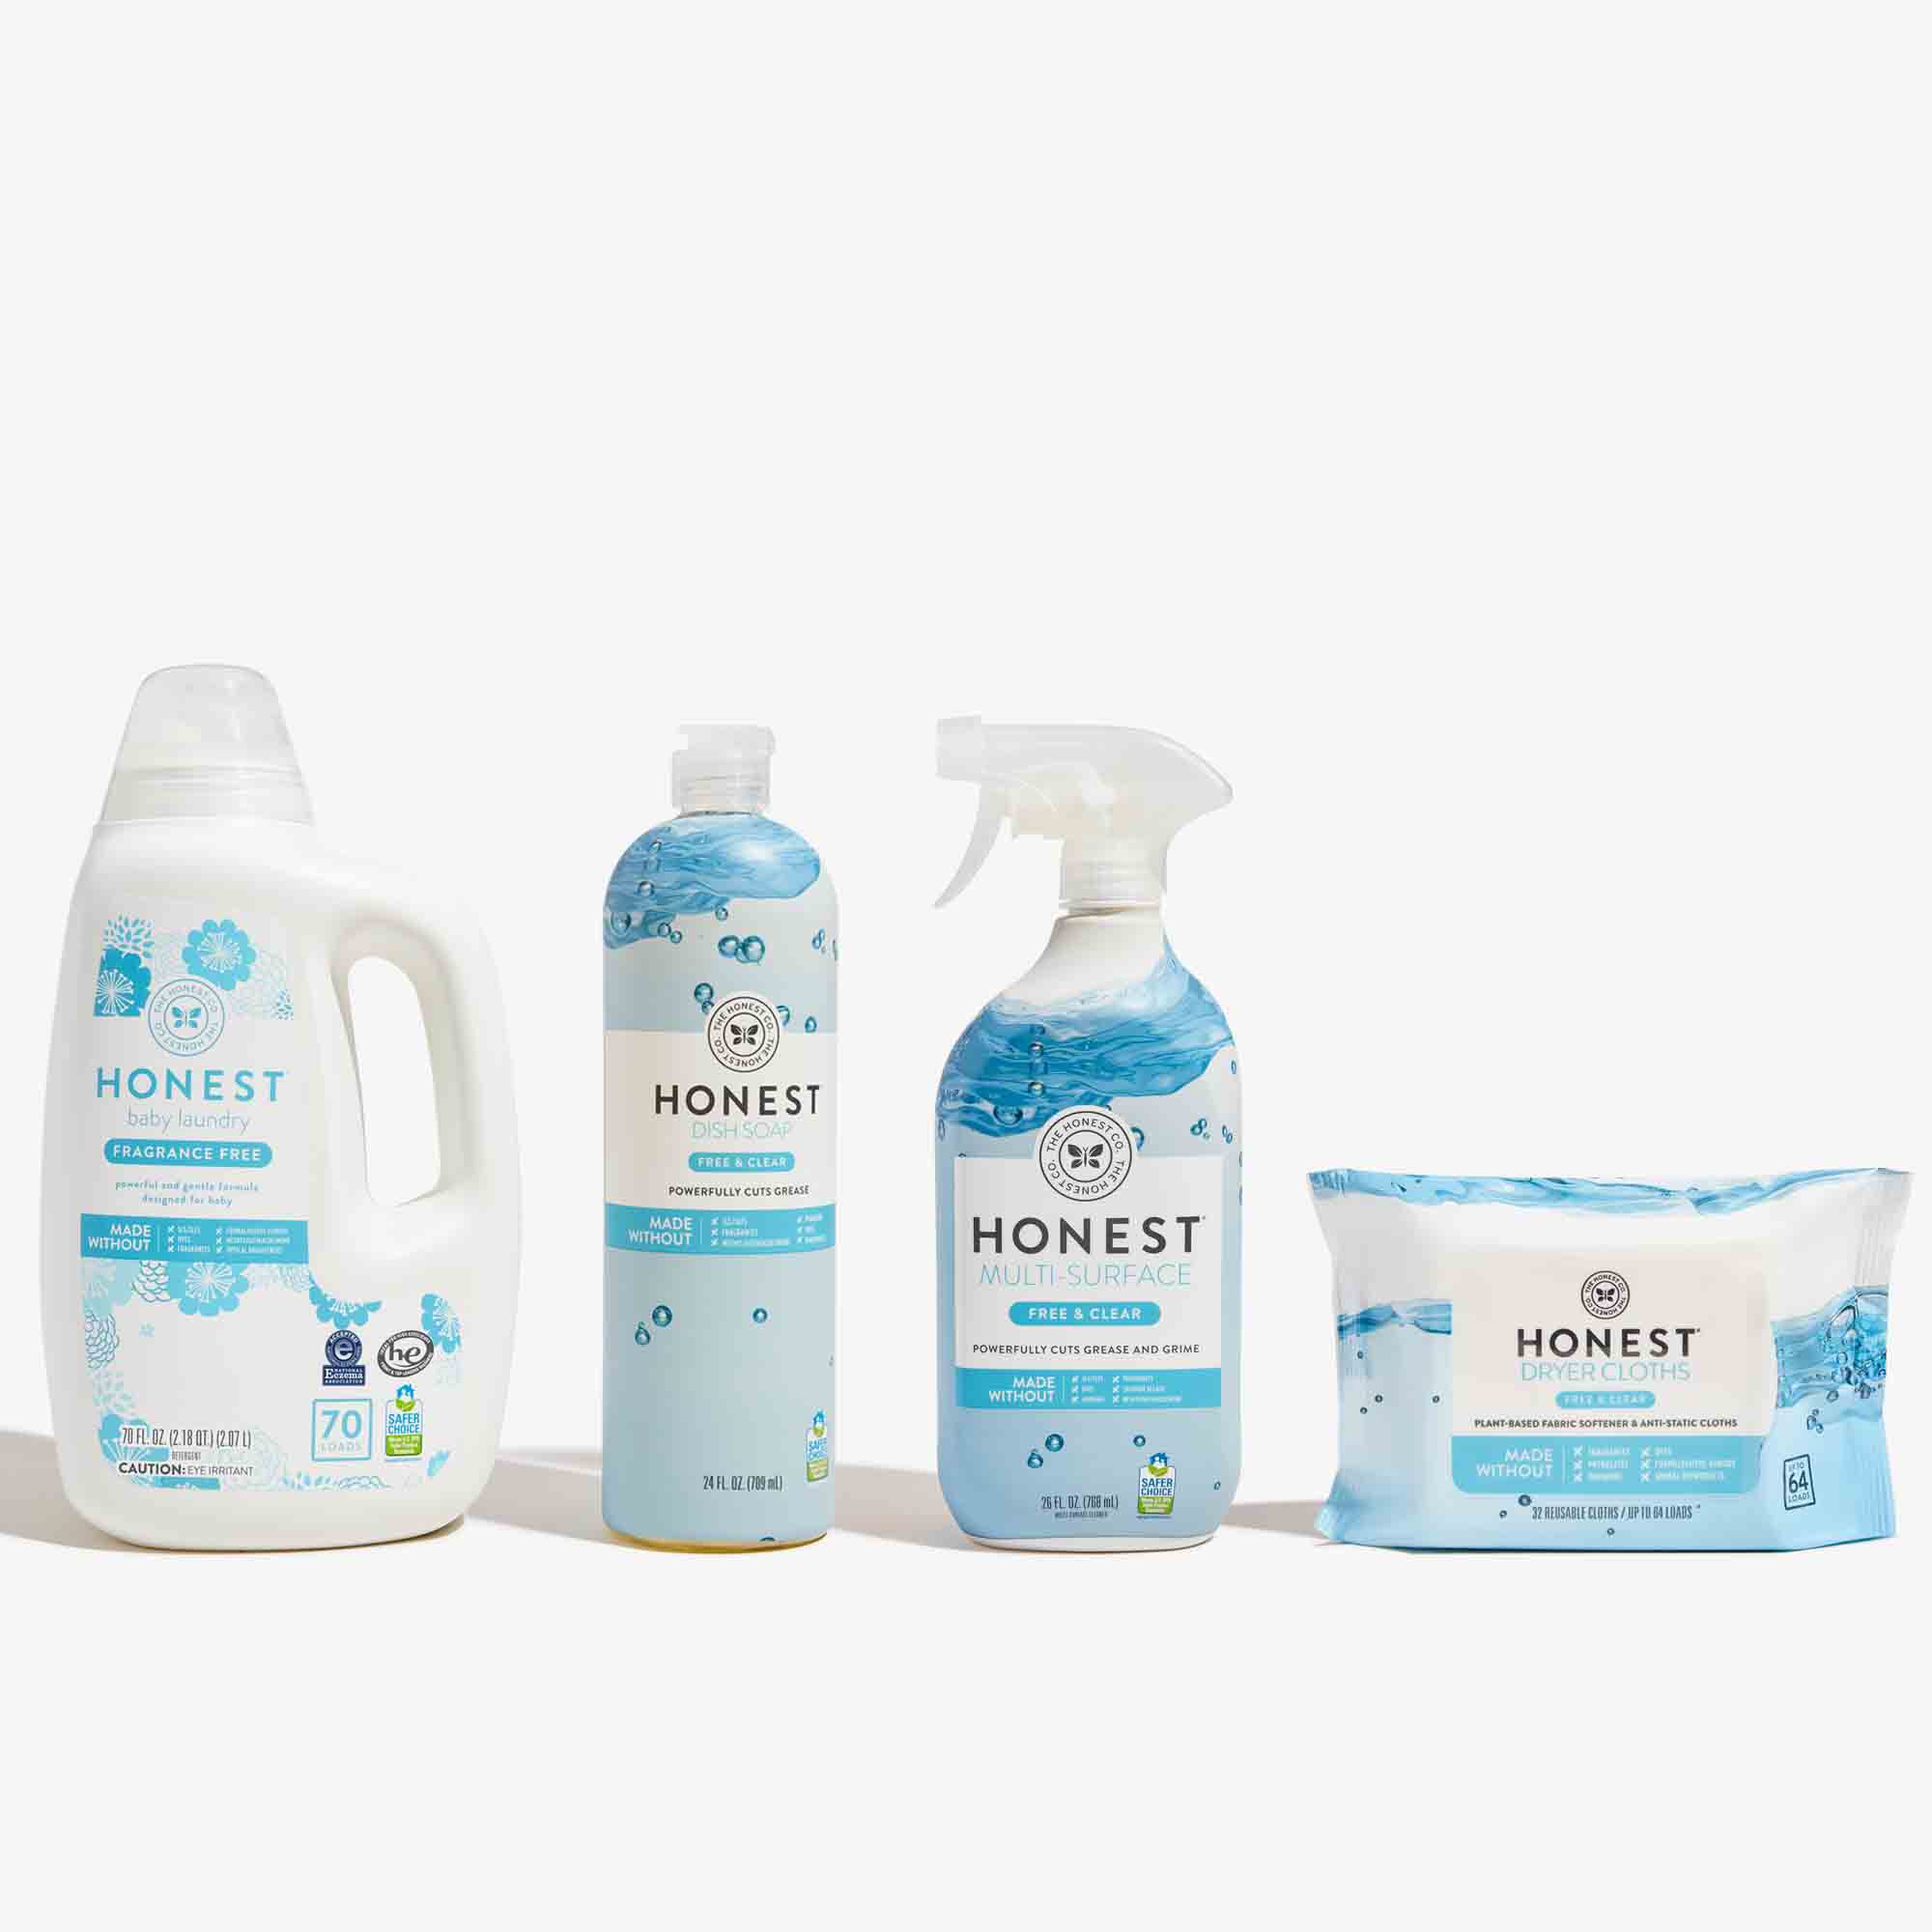 Laundry detergent, dish soap, spray cleaner, and disinfectant wipes from The Honest Co.